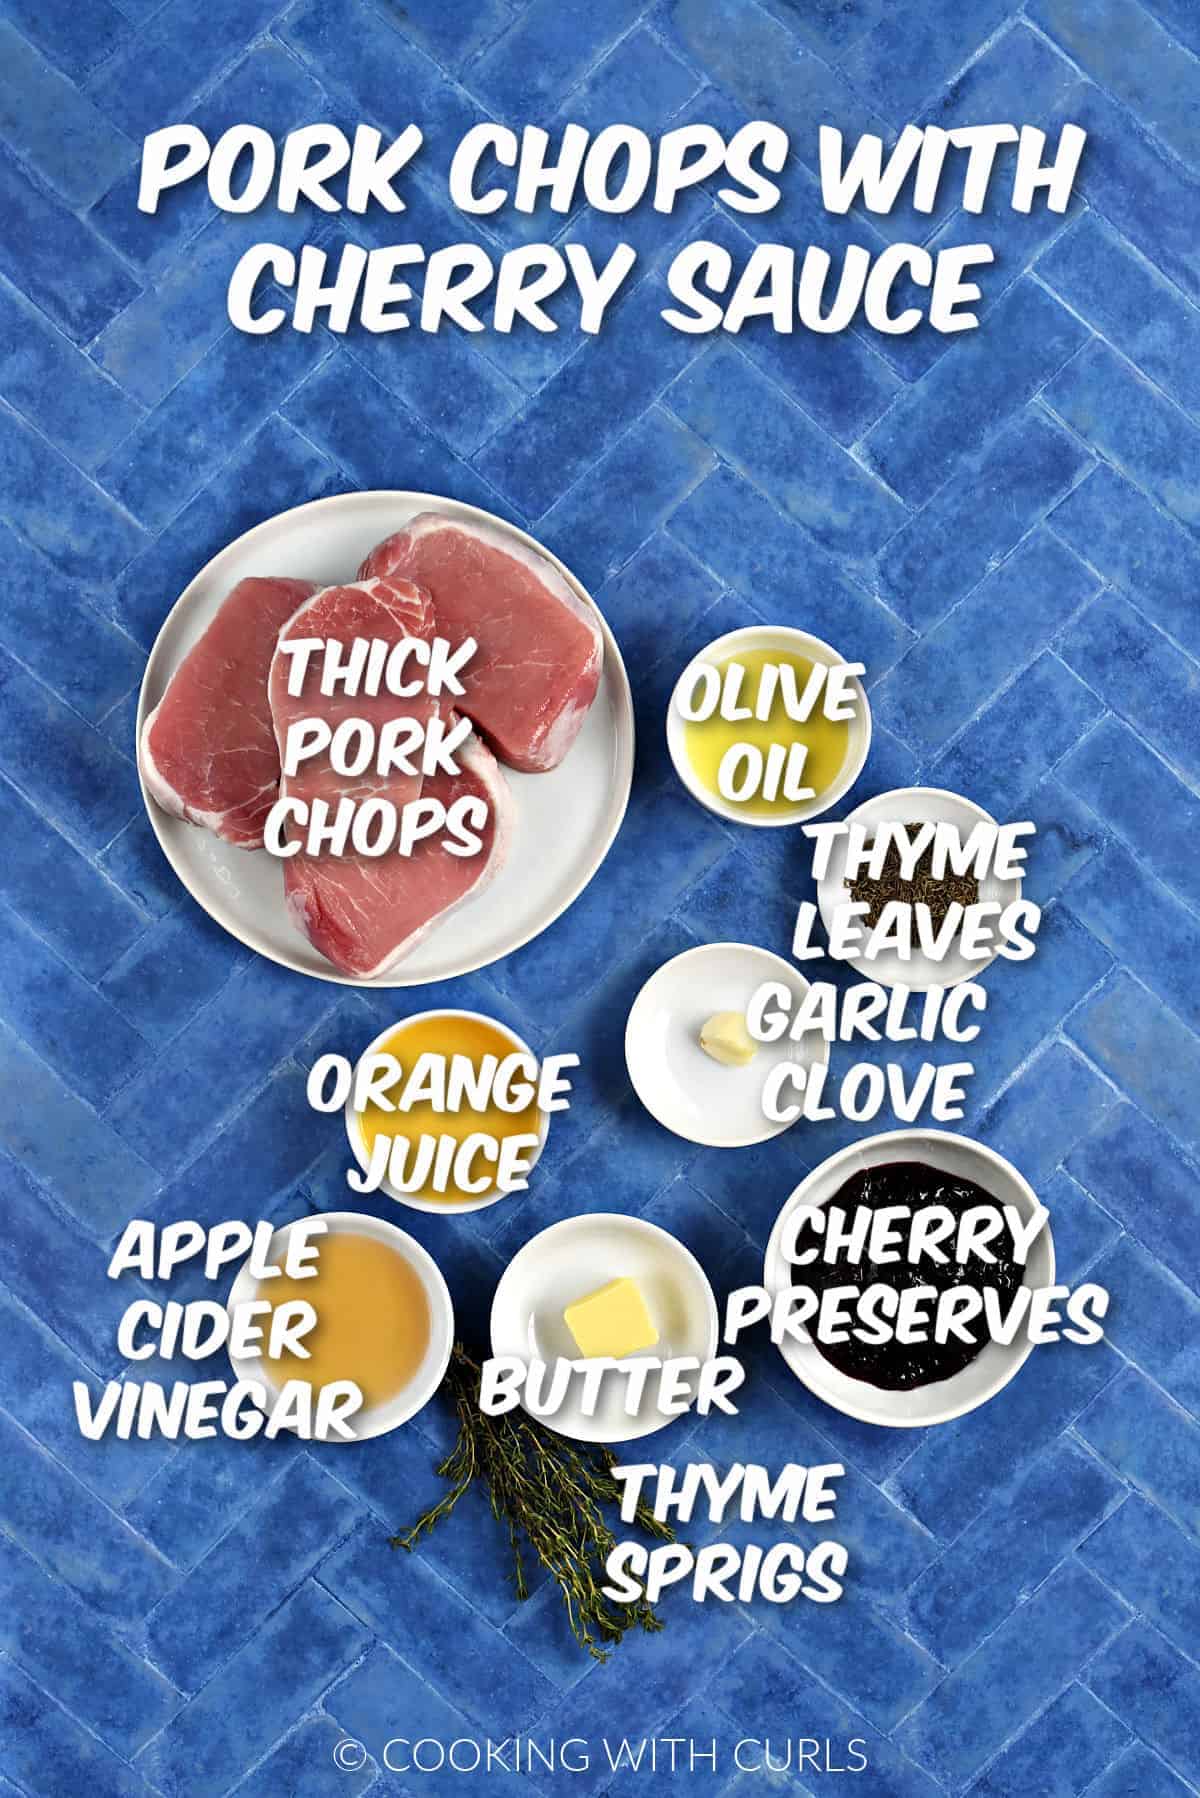 Ingredients to make Pork Chops with Cherry Sauce.